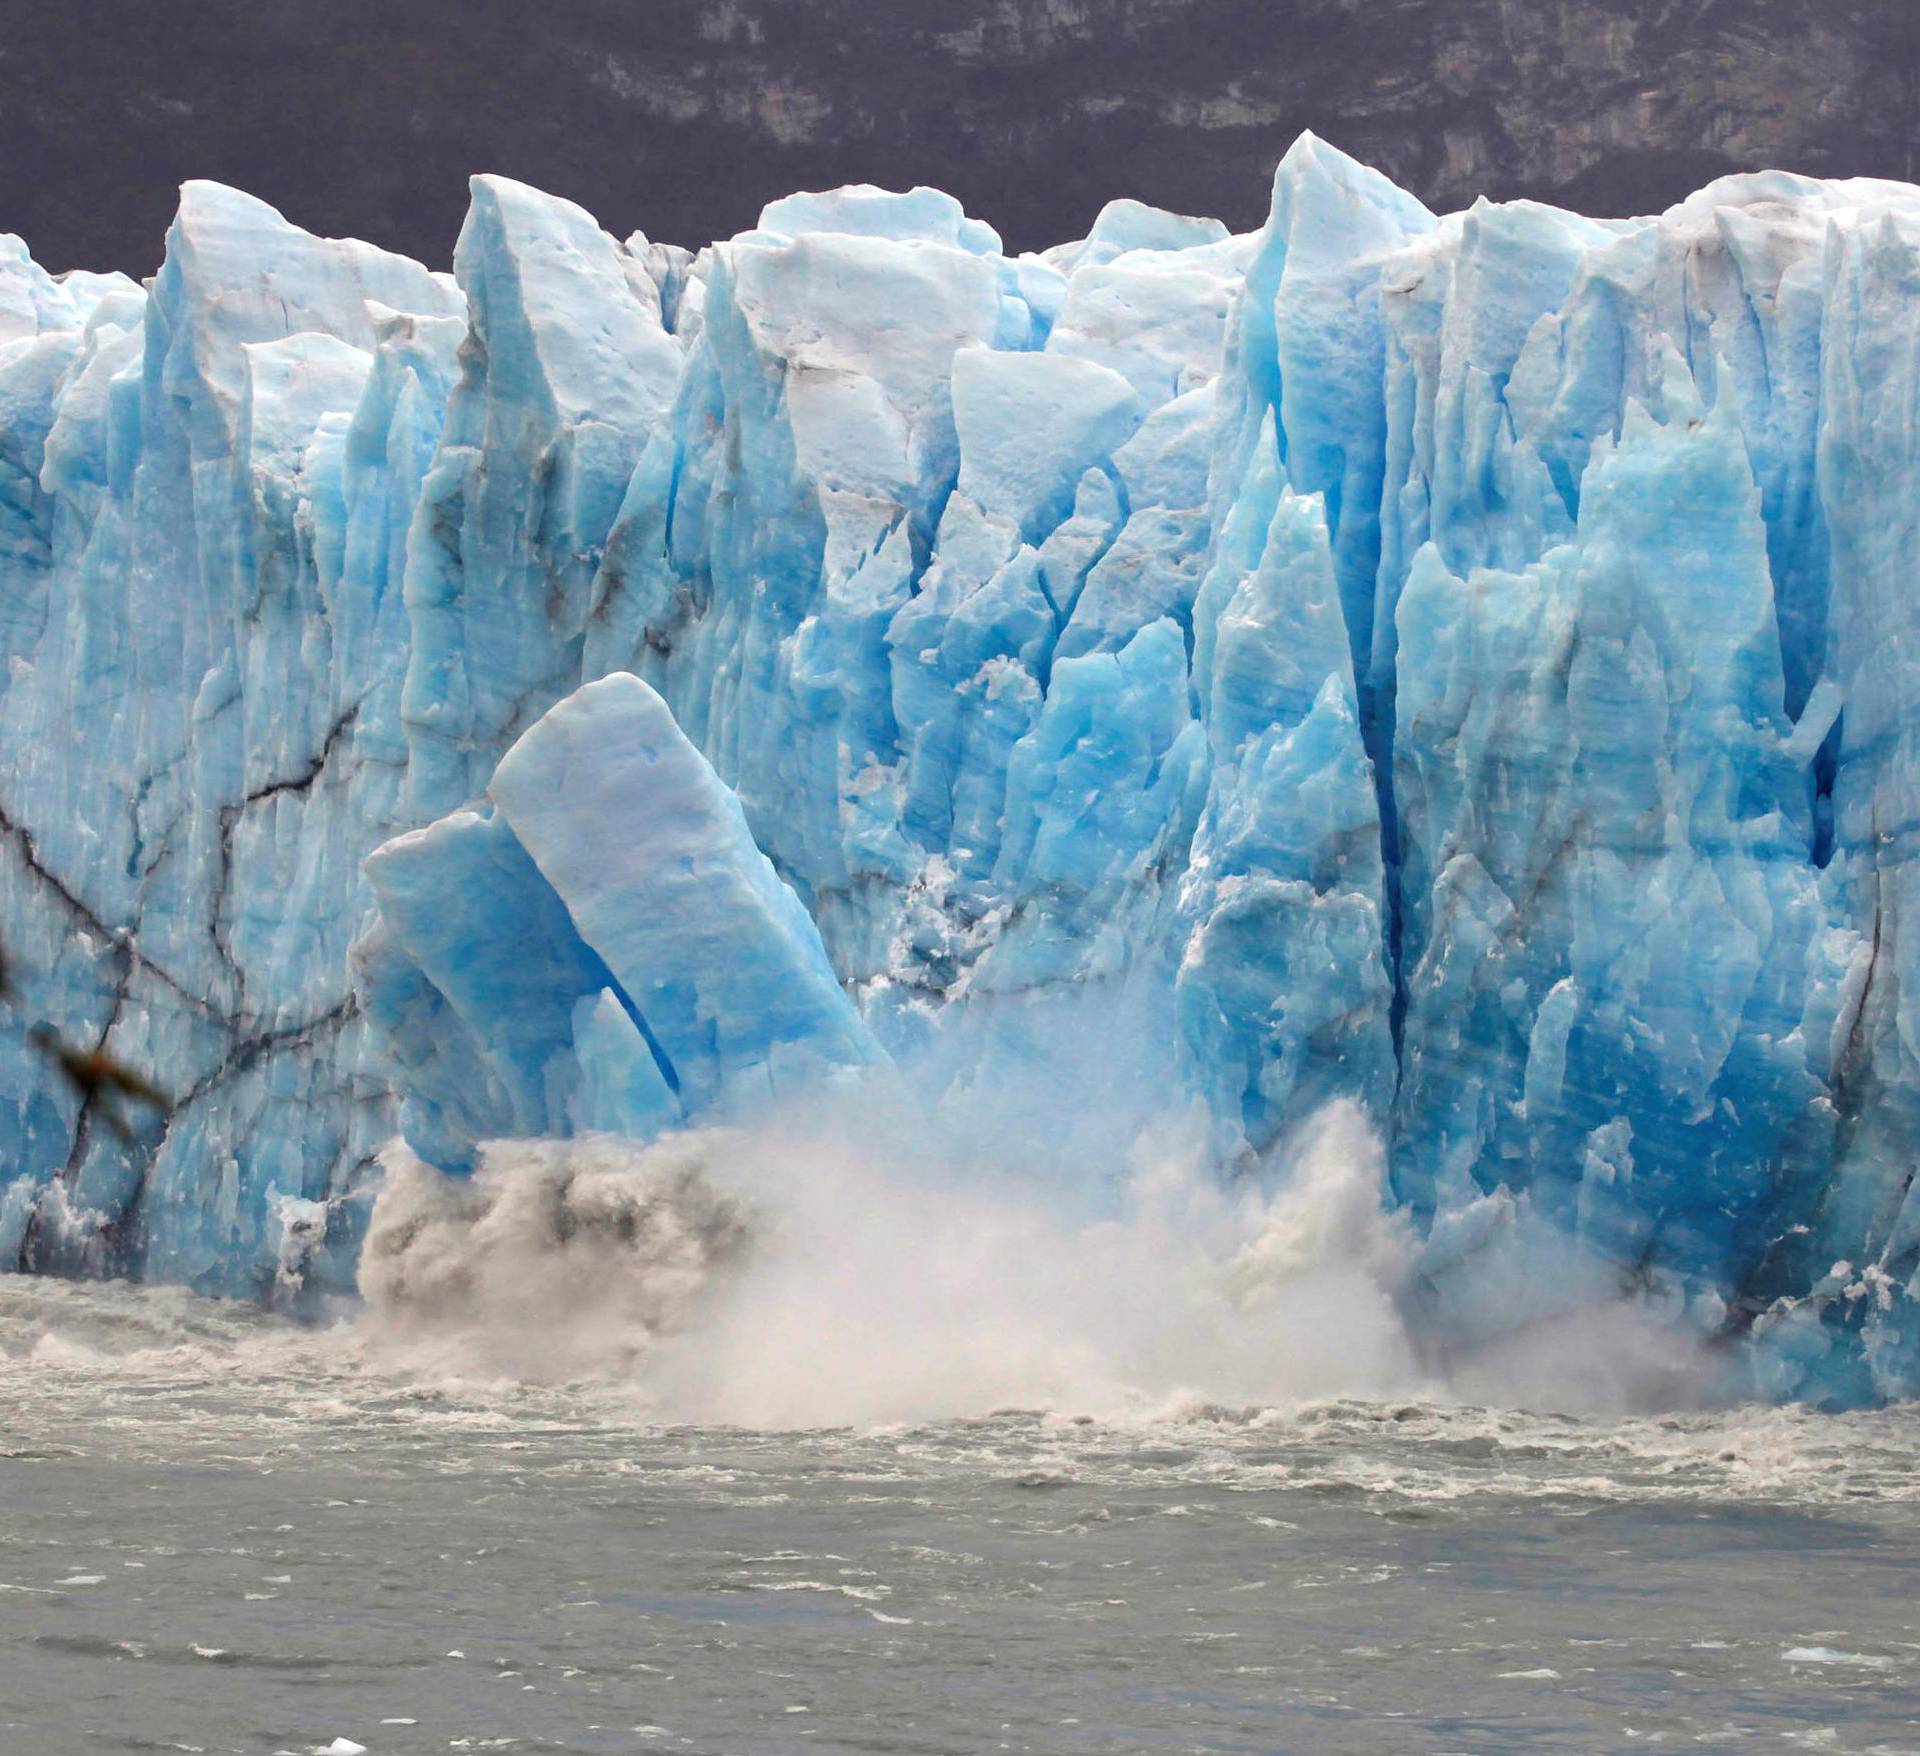 Pieces of ice fall from the front of Argentina's Perito Moreno glacier near the city of El Calafate